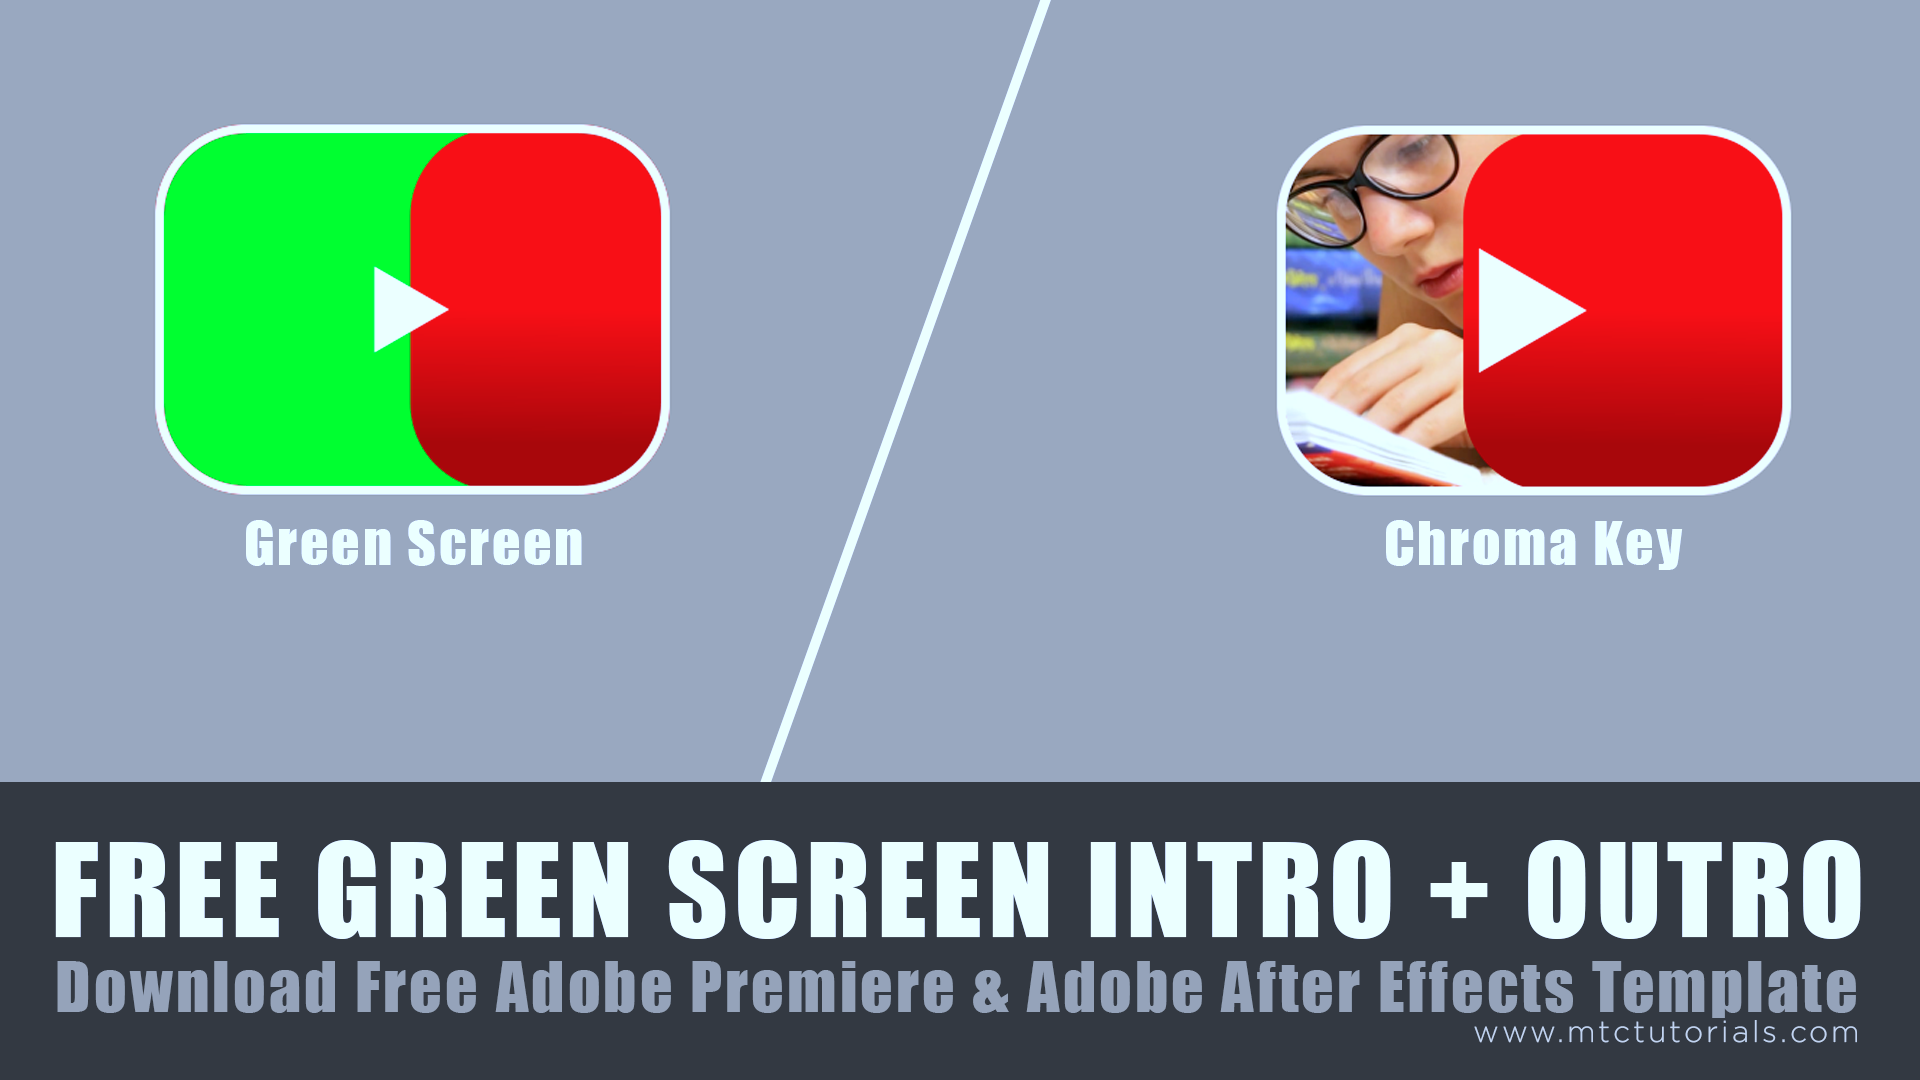 Download youtube intro green screen video, adobe after effects template and premiere template by mtc tutorials